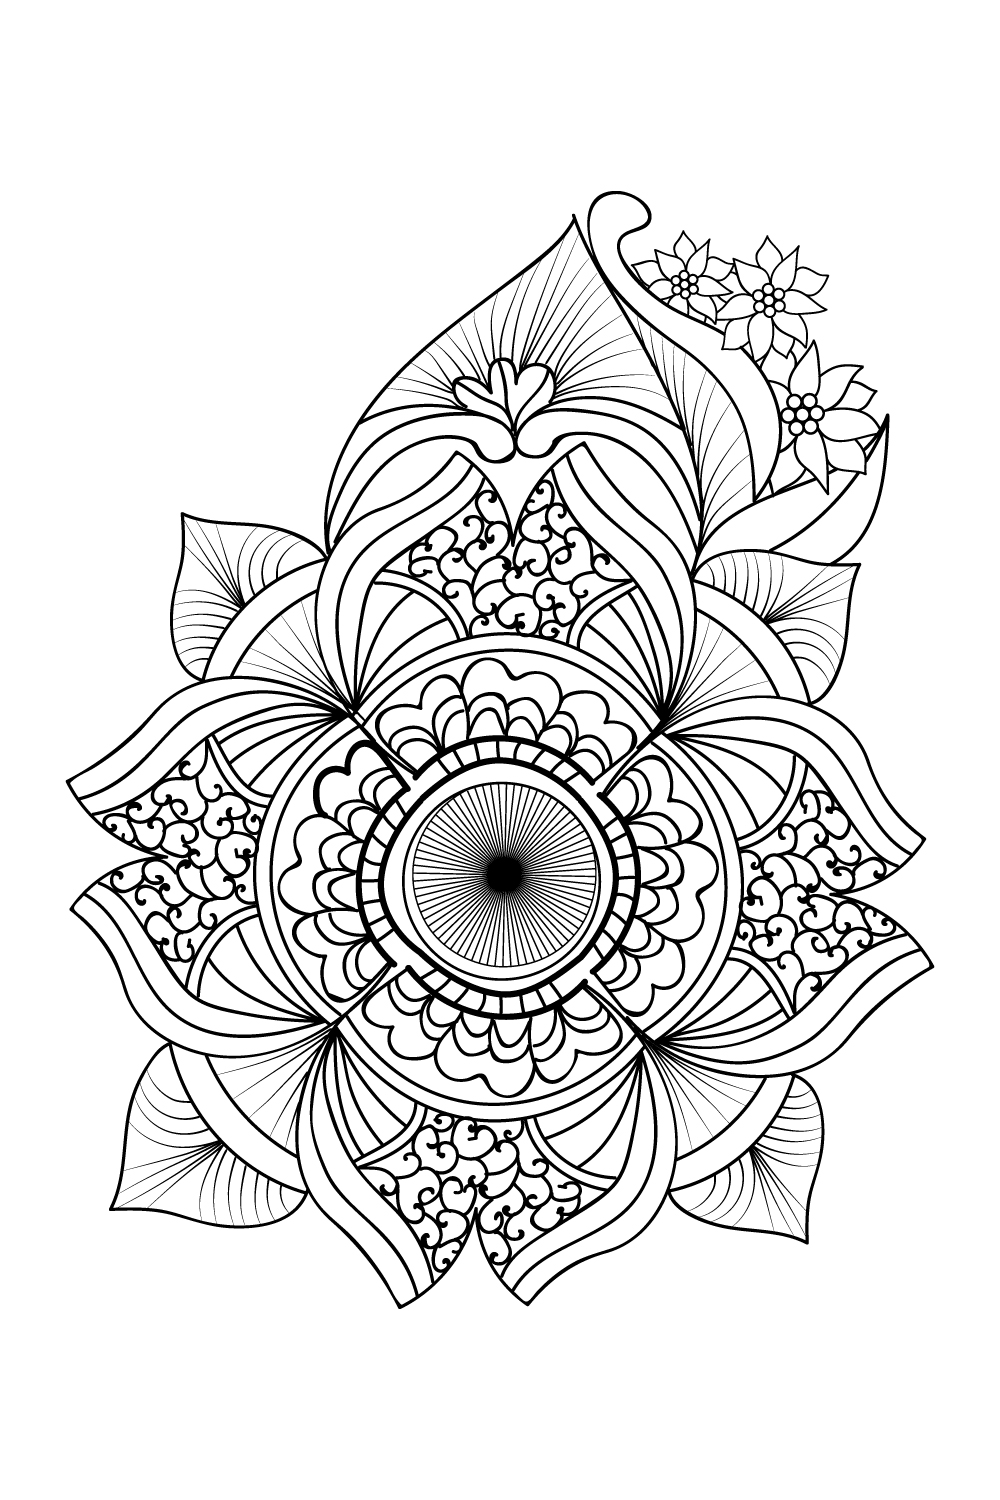 Mamdala design, hand drawn black and illustration, line drawing, pencil art, engraved ink art, ornamental mandala design, coloring pages for adults pinterest preview image.